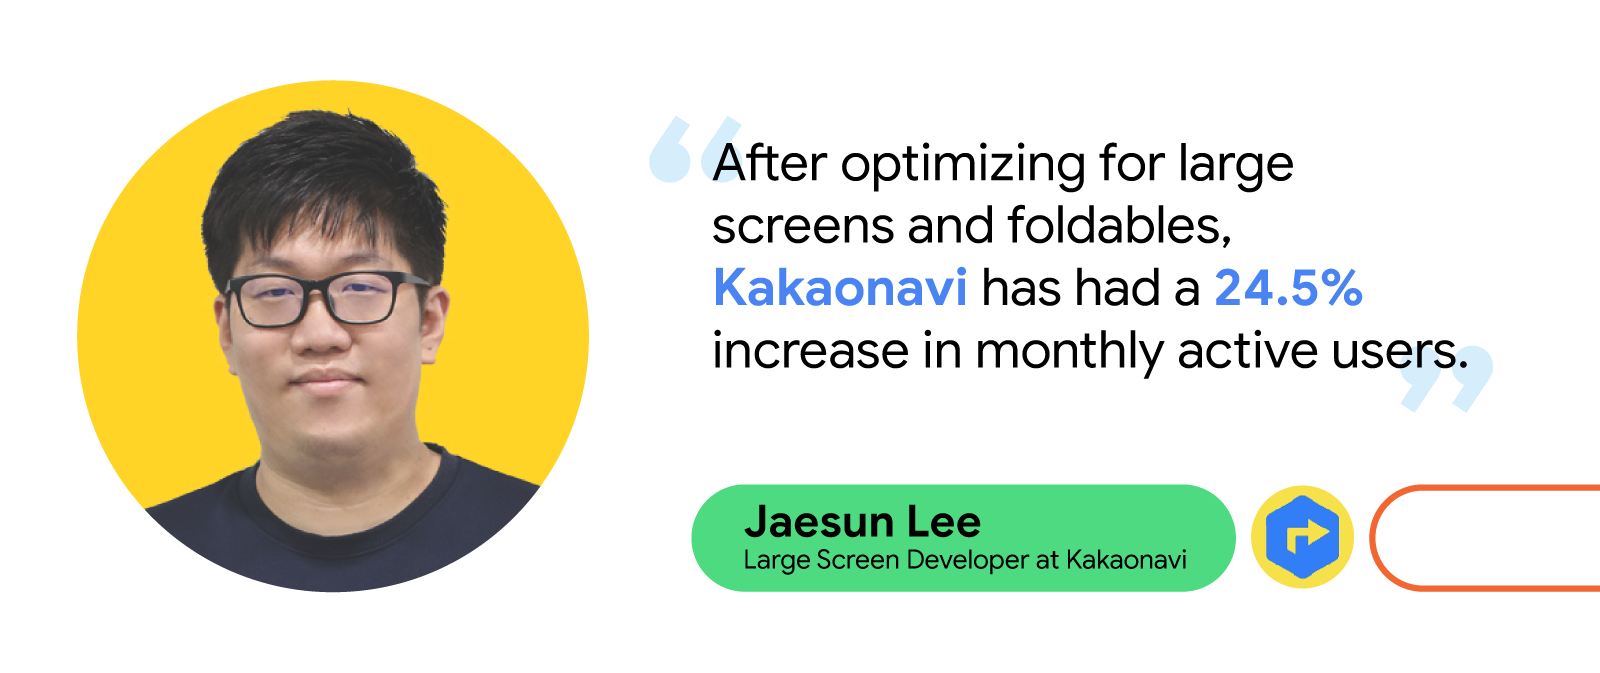 Headshot of Jaesun Lee, Large Screen Developer at Kakaonavi with quote reads 'After optimizing for large screens and foldables, Kakaonavi has had a 24.5% increase in monthly active users.'